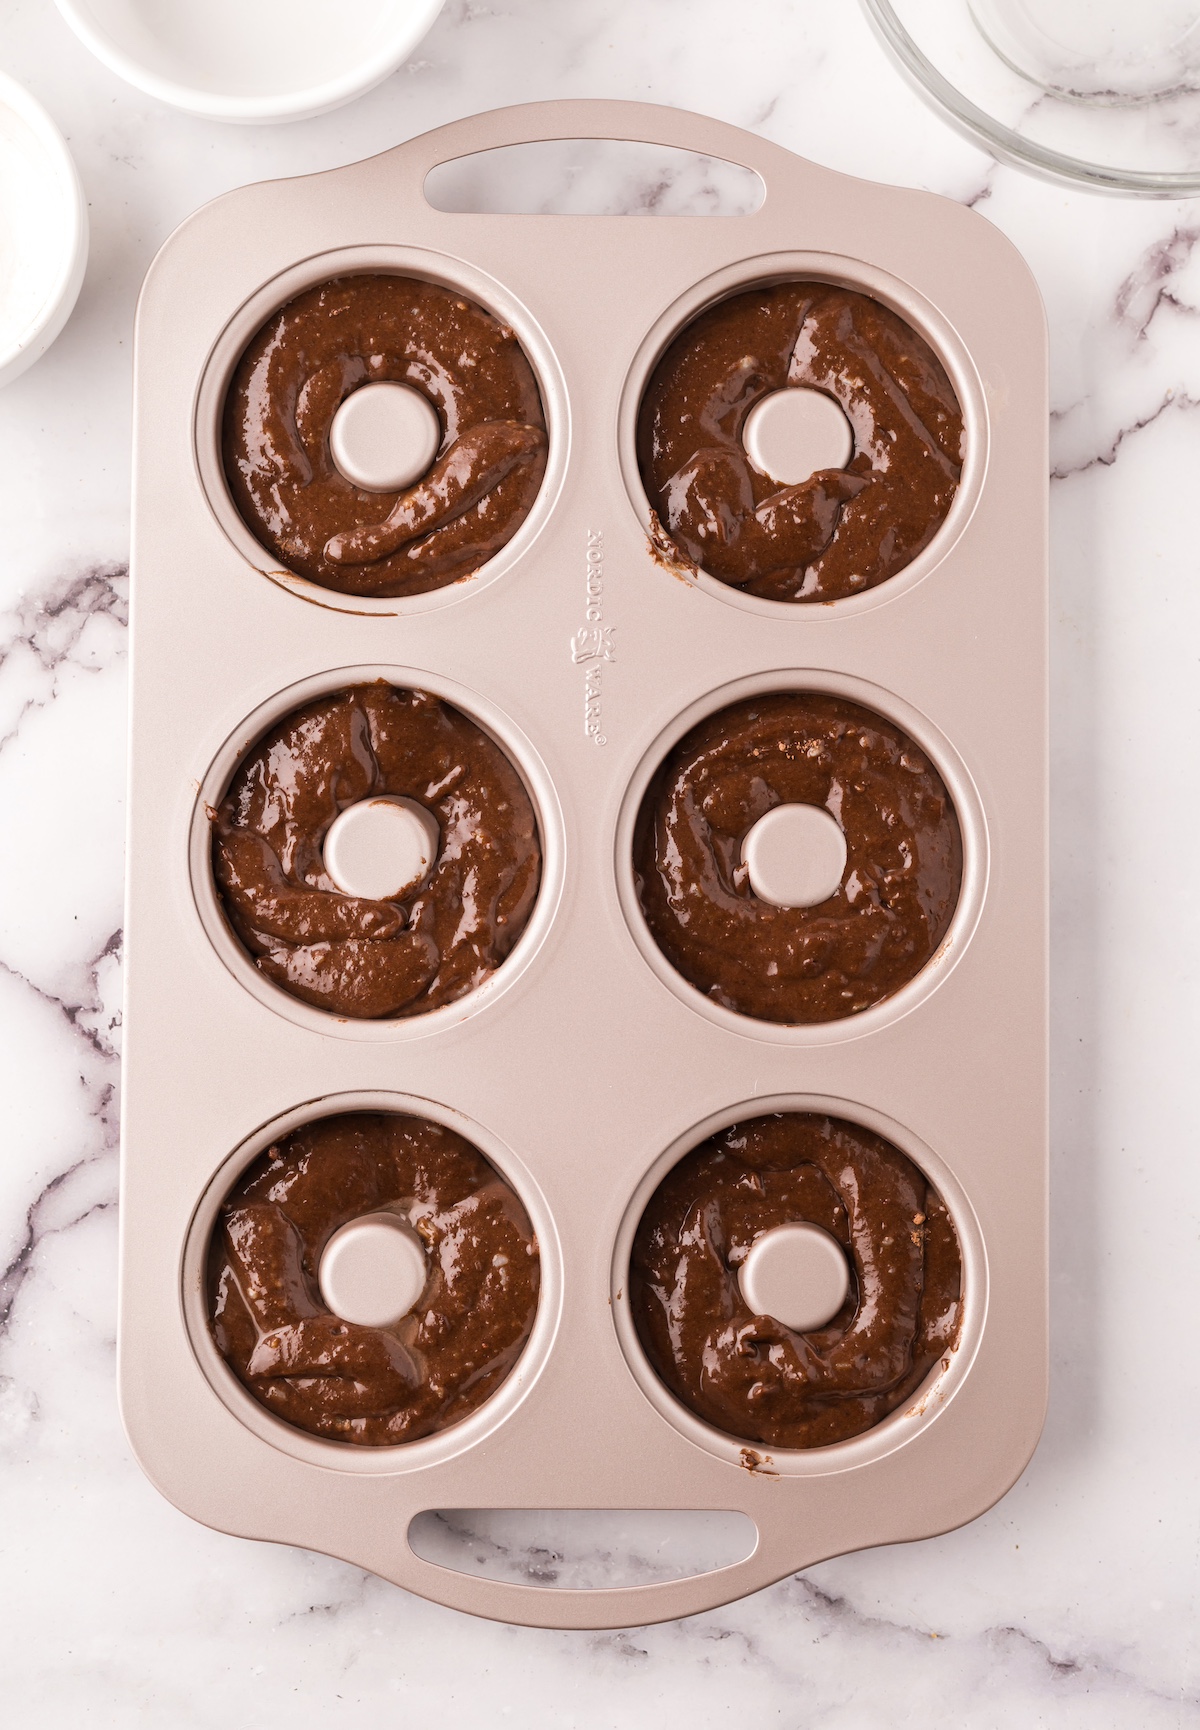 Chocolate donut batter added to a donut pan